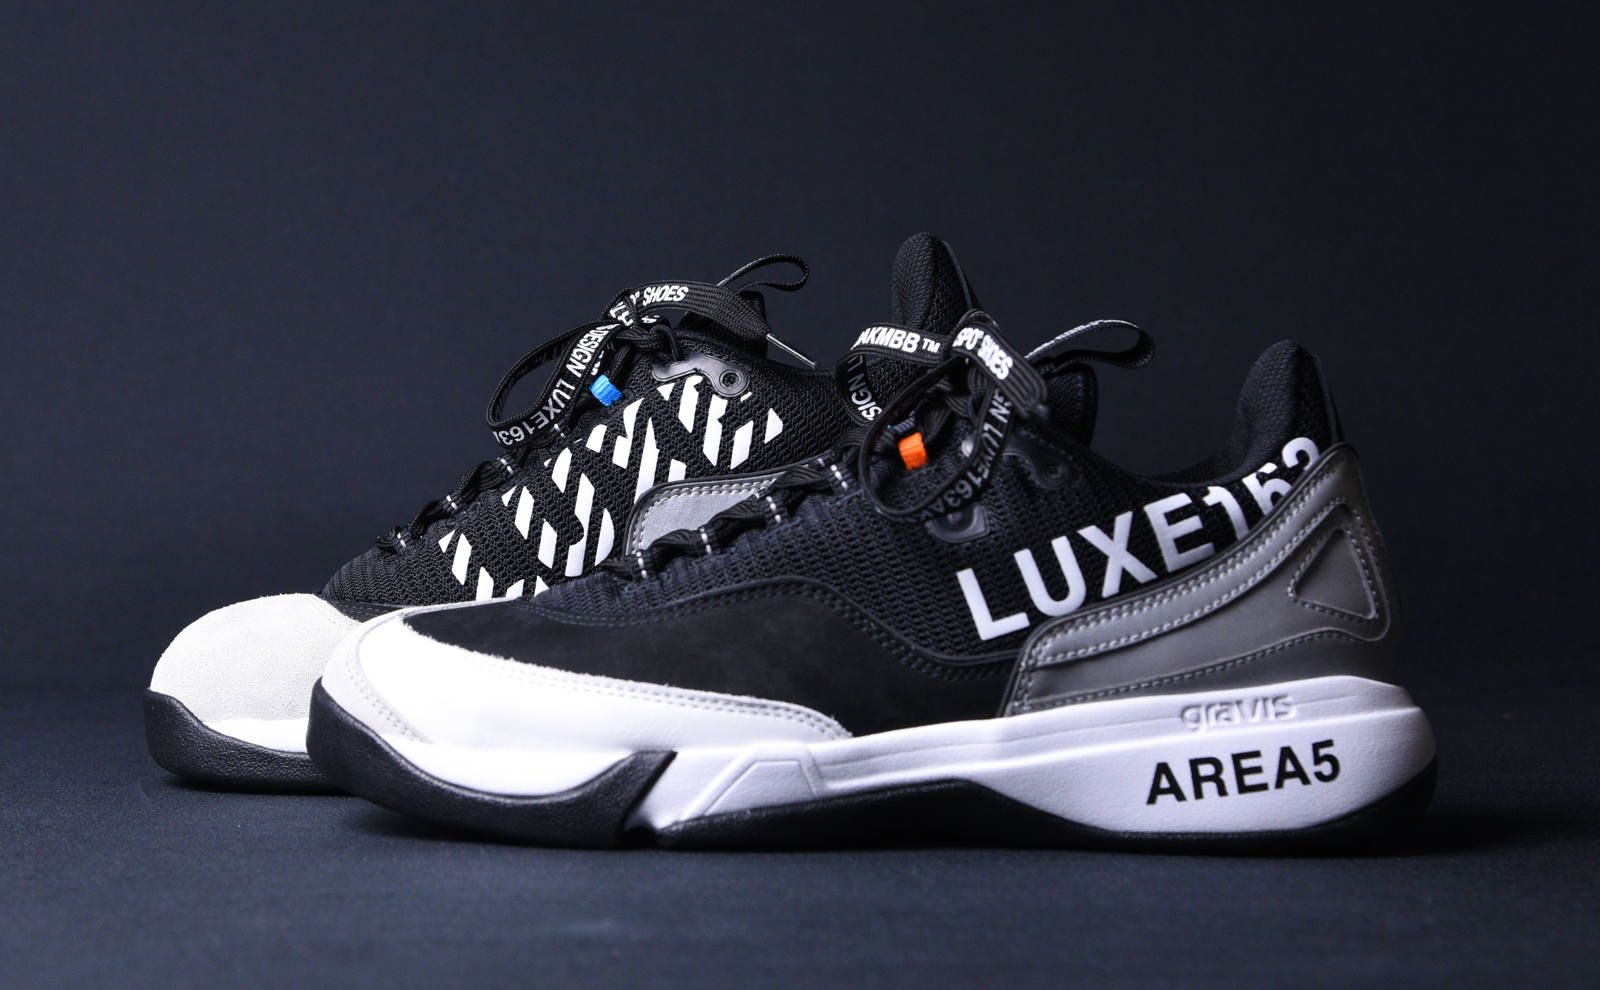 LUXE163AKMBB×gravis】 SPECIAL LIMITED COLLECTION 本日発売 | gossip